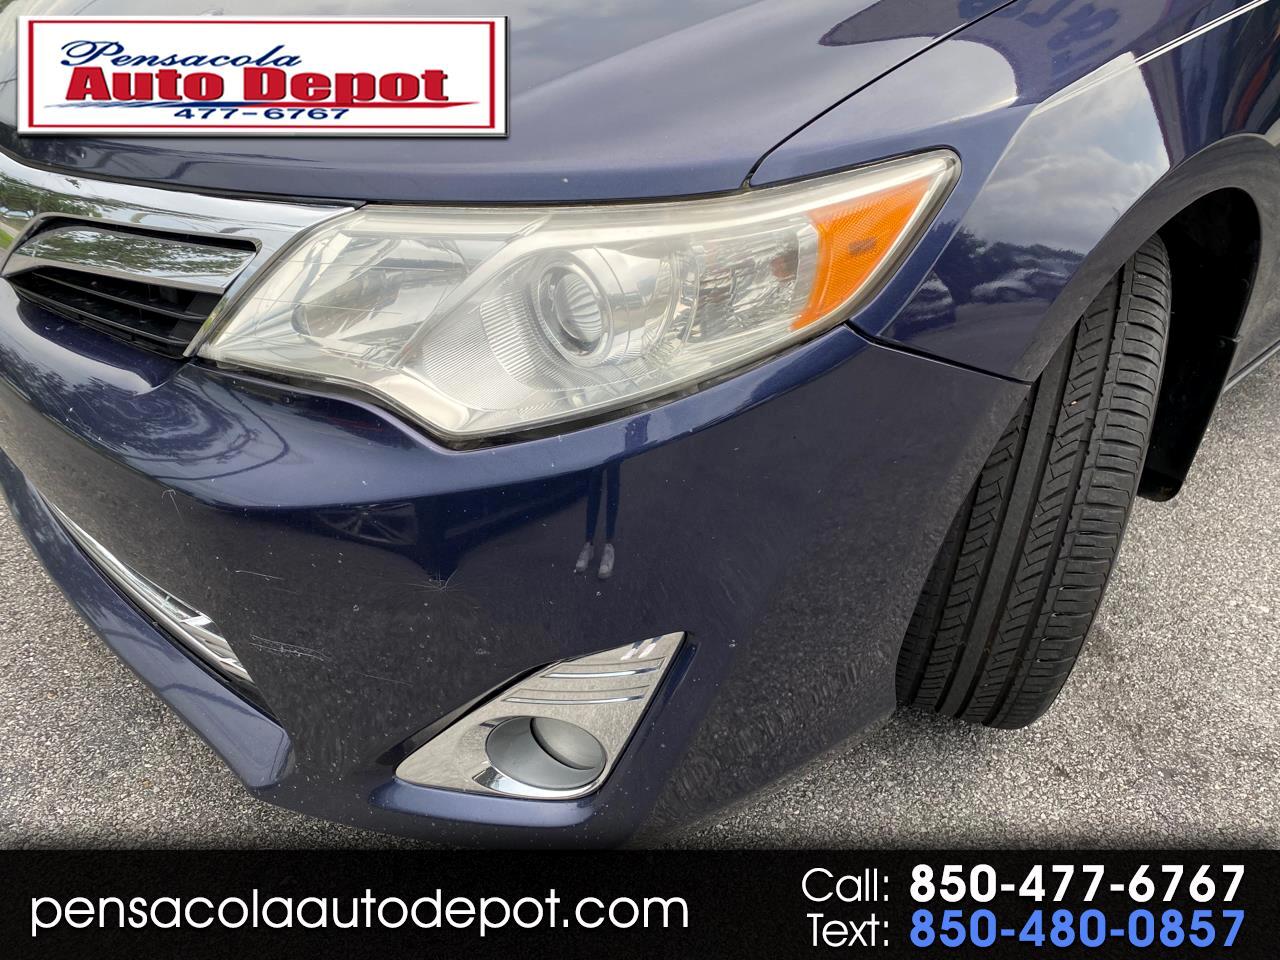 Toyota Camry 2014.5 4dr Sdn I4 Auto XLE (Natl) 2014